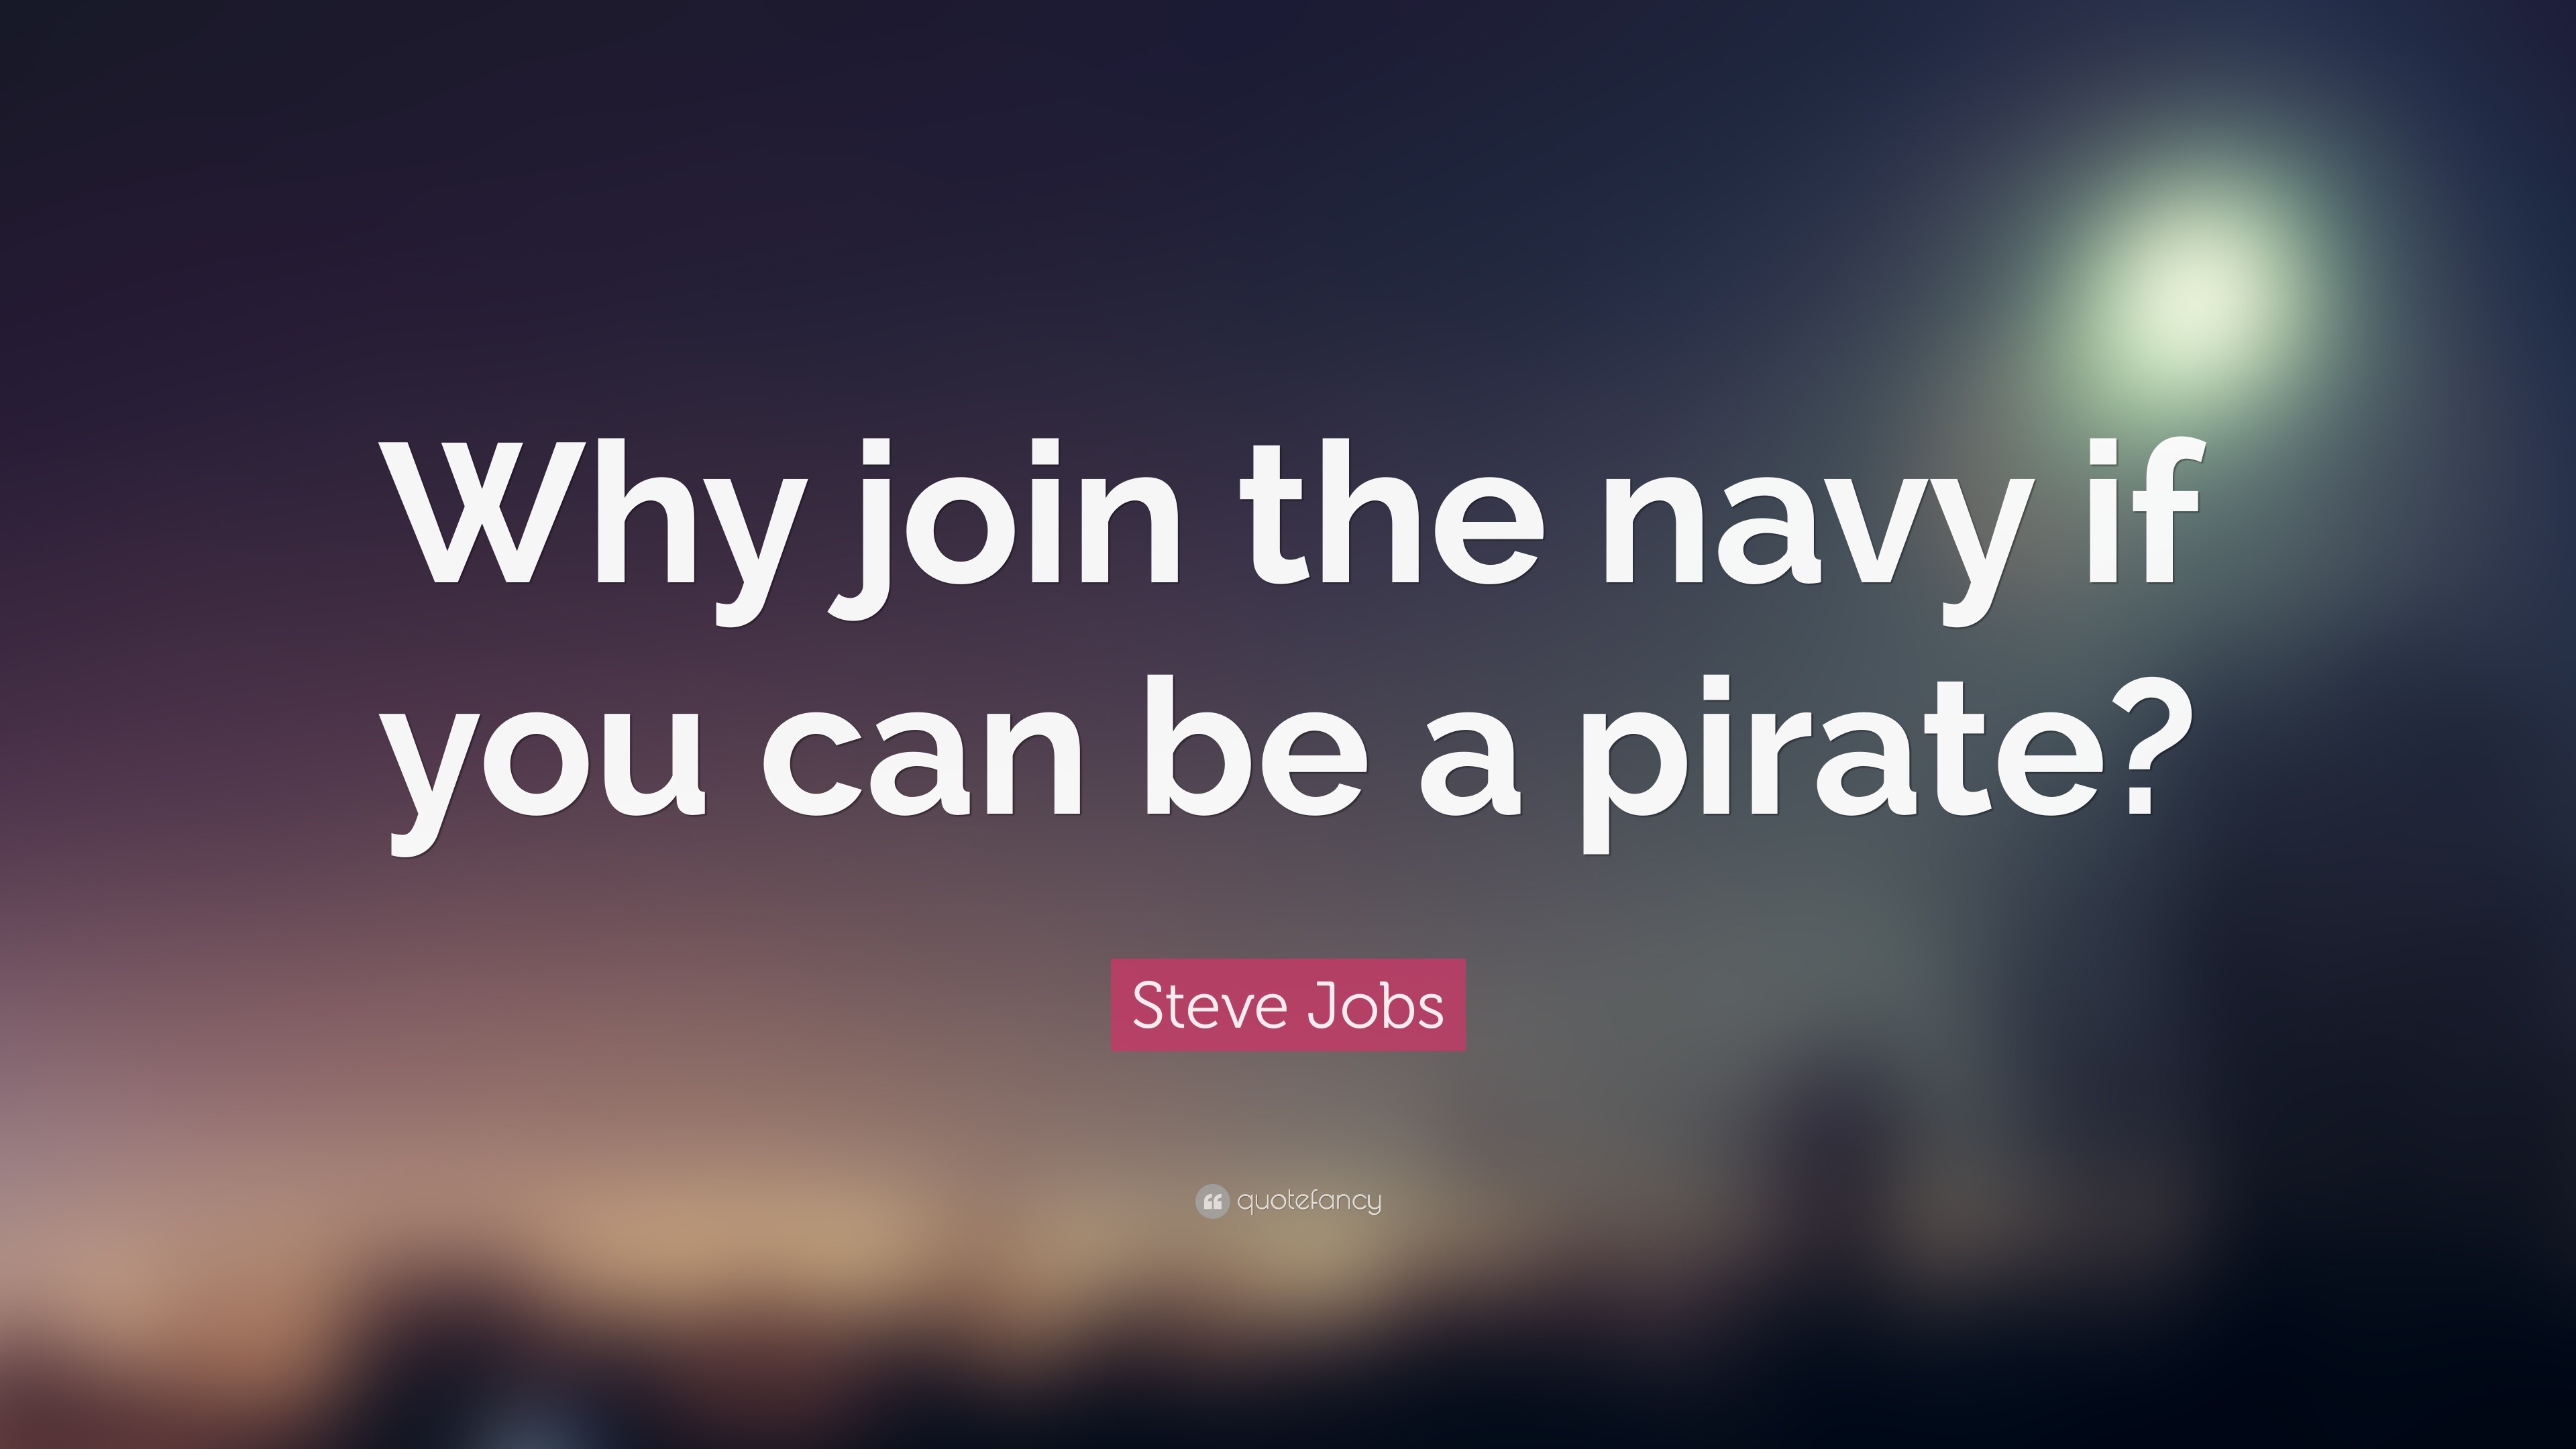 Steve Jobs Quote: “Why join the navy if you can be a pirate?”